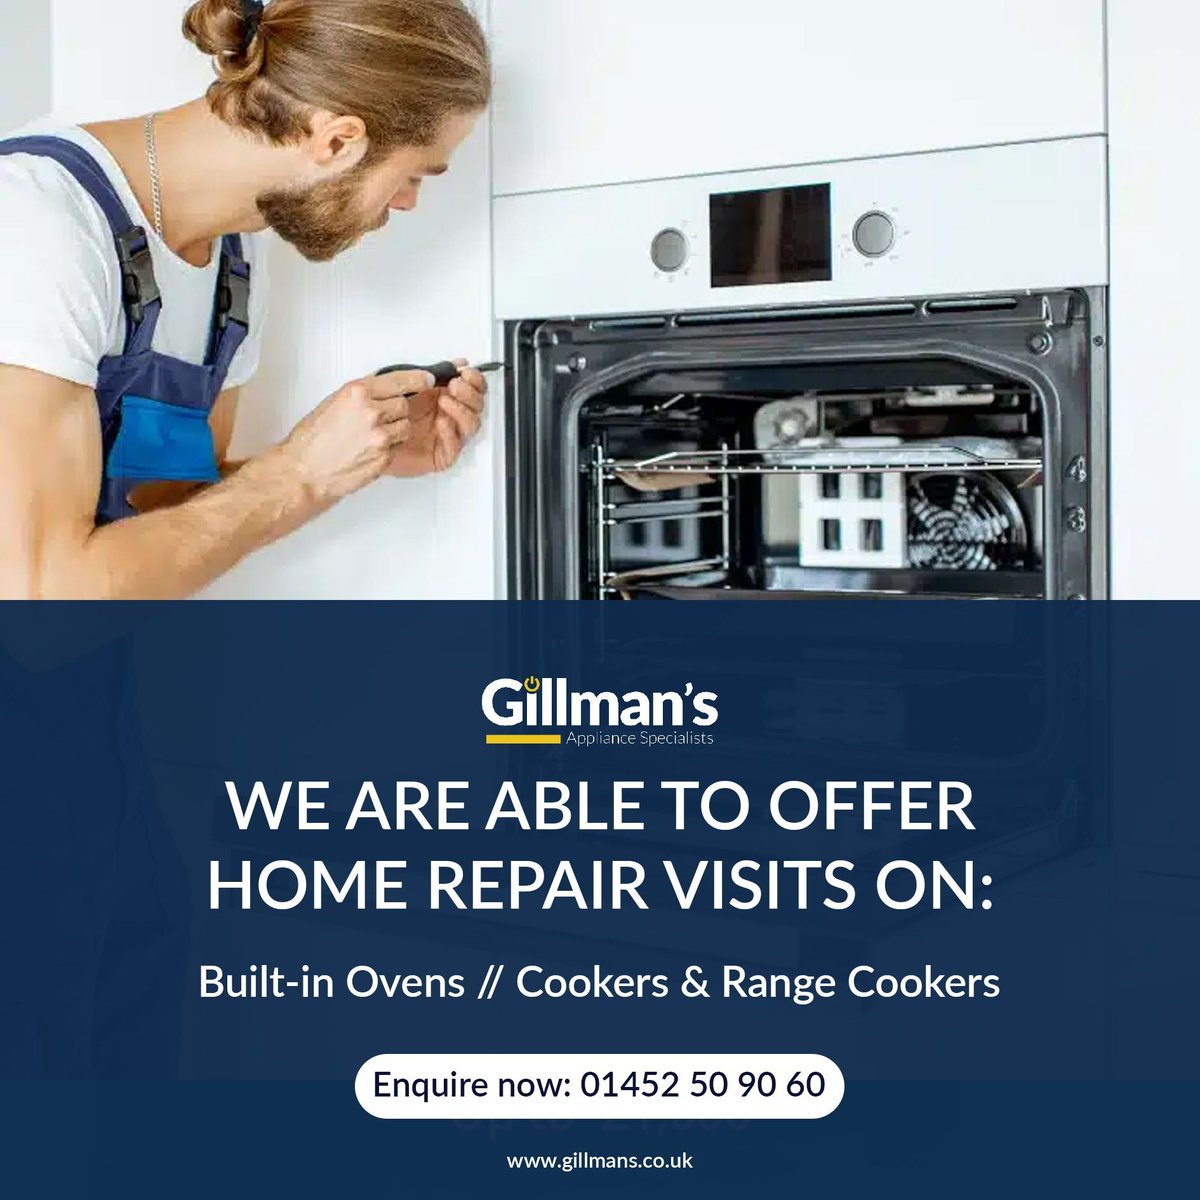 If your oven or range needs repair, Gillman's sends skilled technicians to your home for prompt service. Our experienced professionals diagnose and resolve appliance issues efficiently, ensuring your oven or range is back up and running smoothly in no time. Trust Gillman's